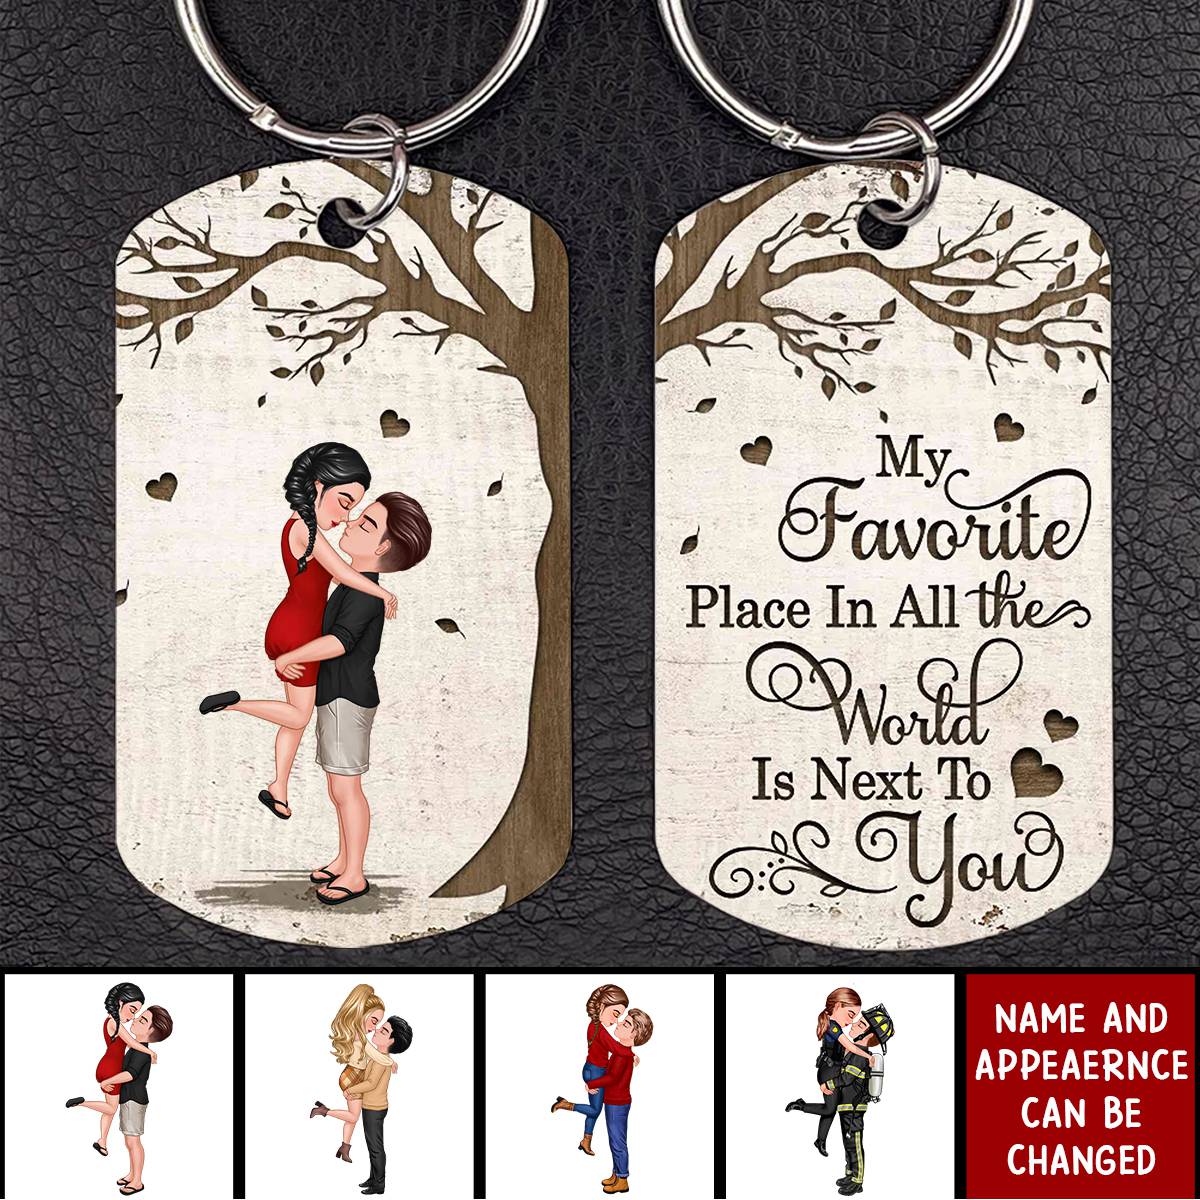 Favorite Place In The World Couple Kissing - Personalized Stainless Steel Keychain